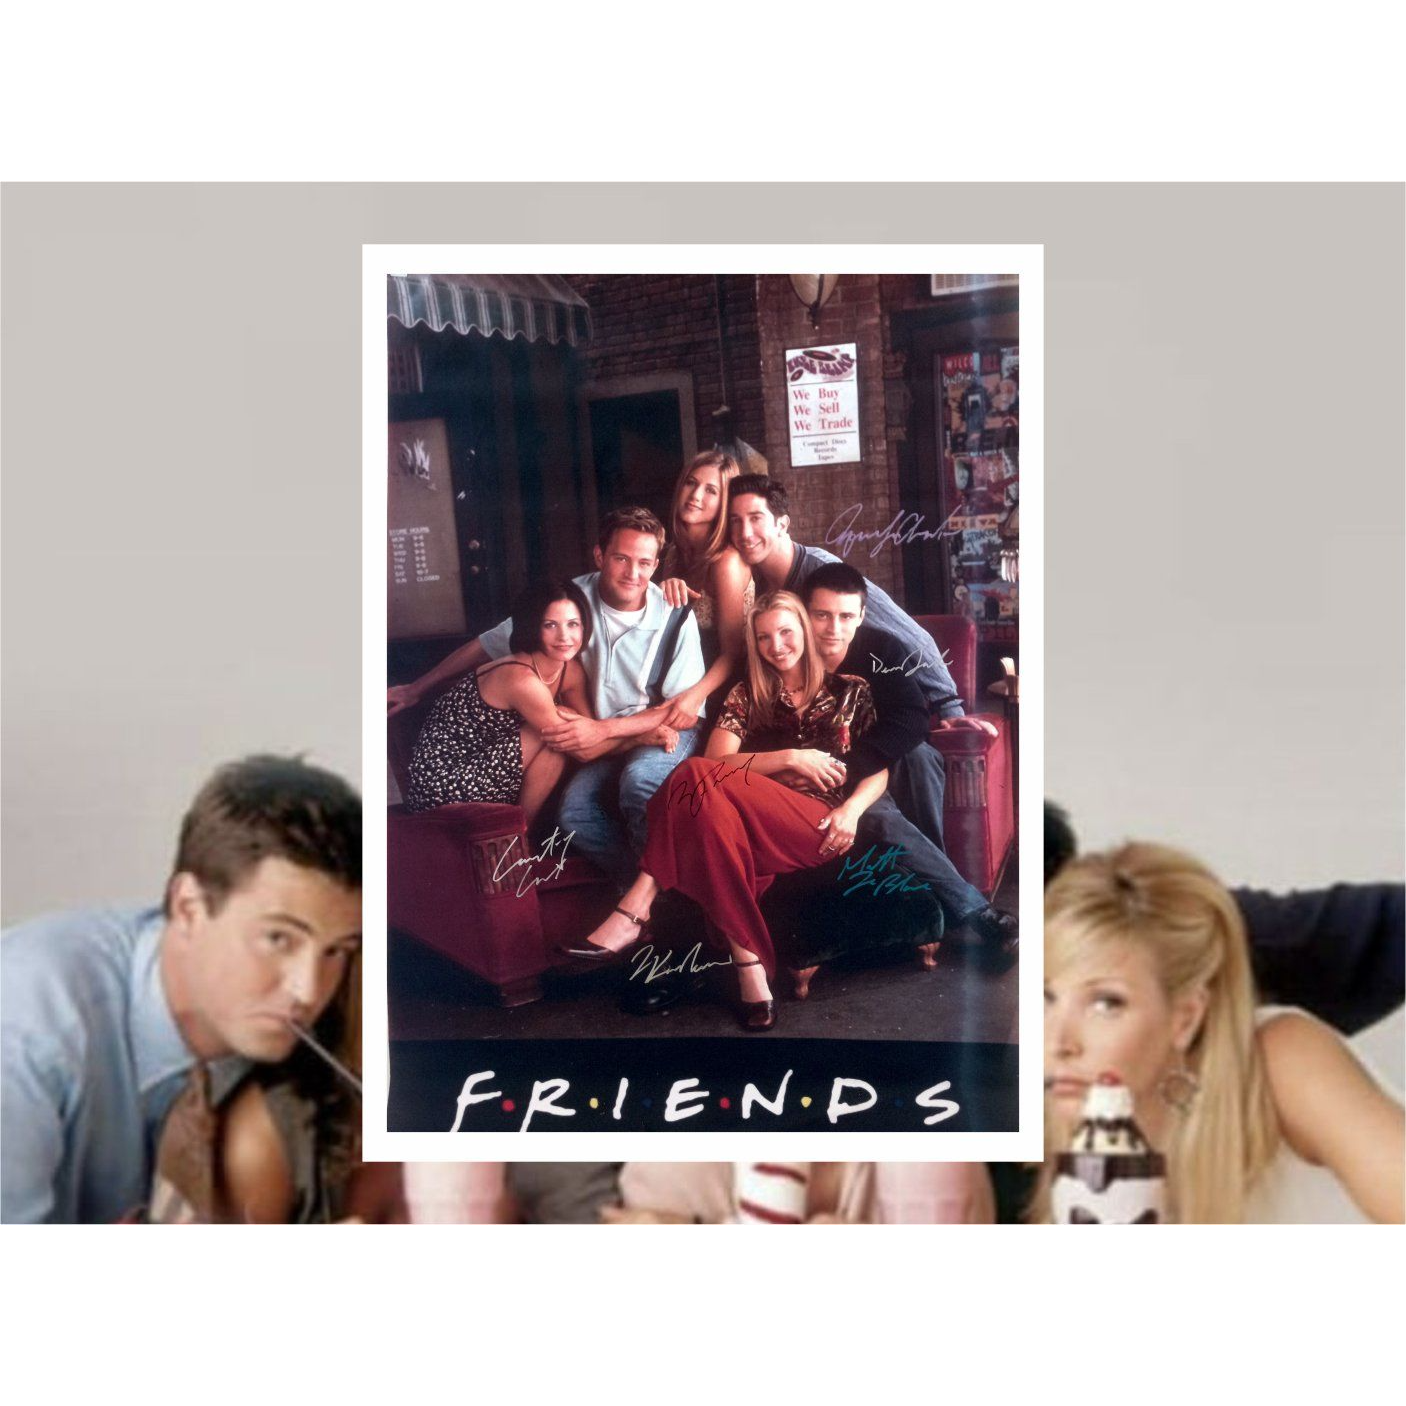 Friends canvas poster 36x24 Jennifer Aniston, Lisa Kudrow, David Schwimmer, Courtney Cox signed with proof